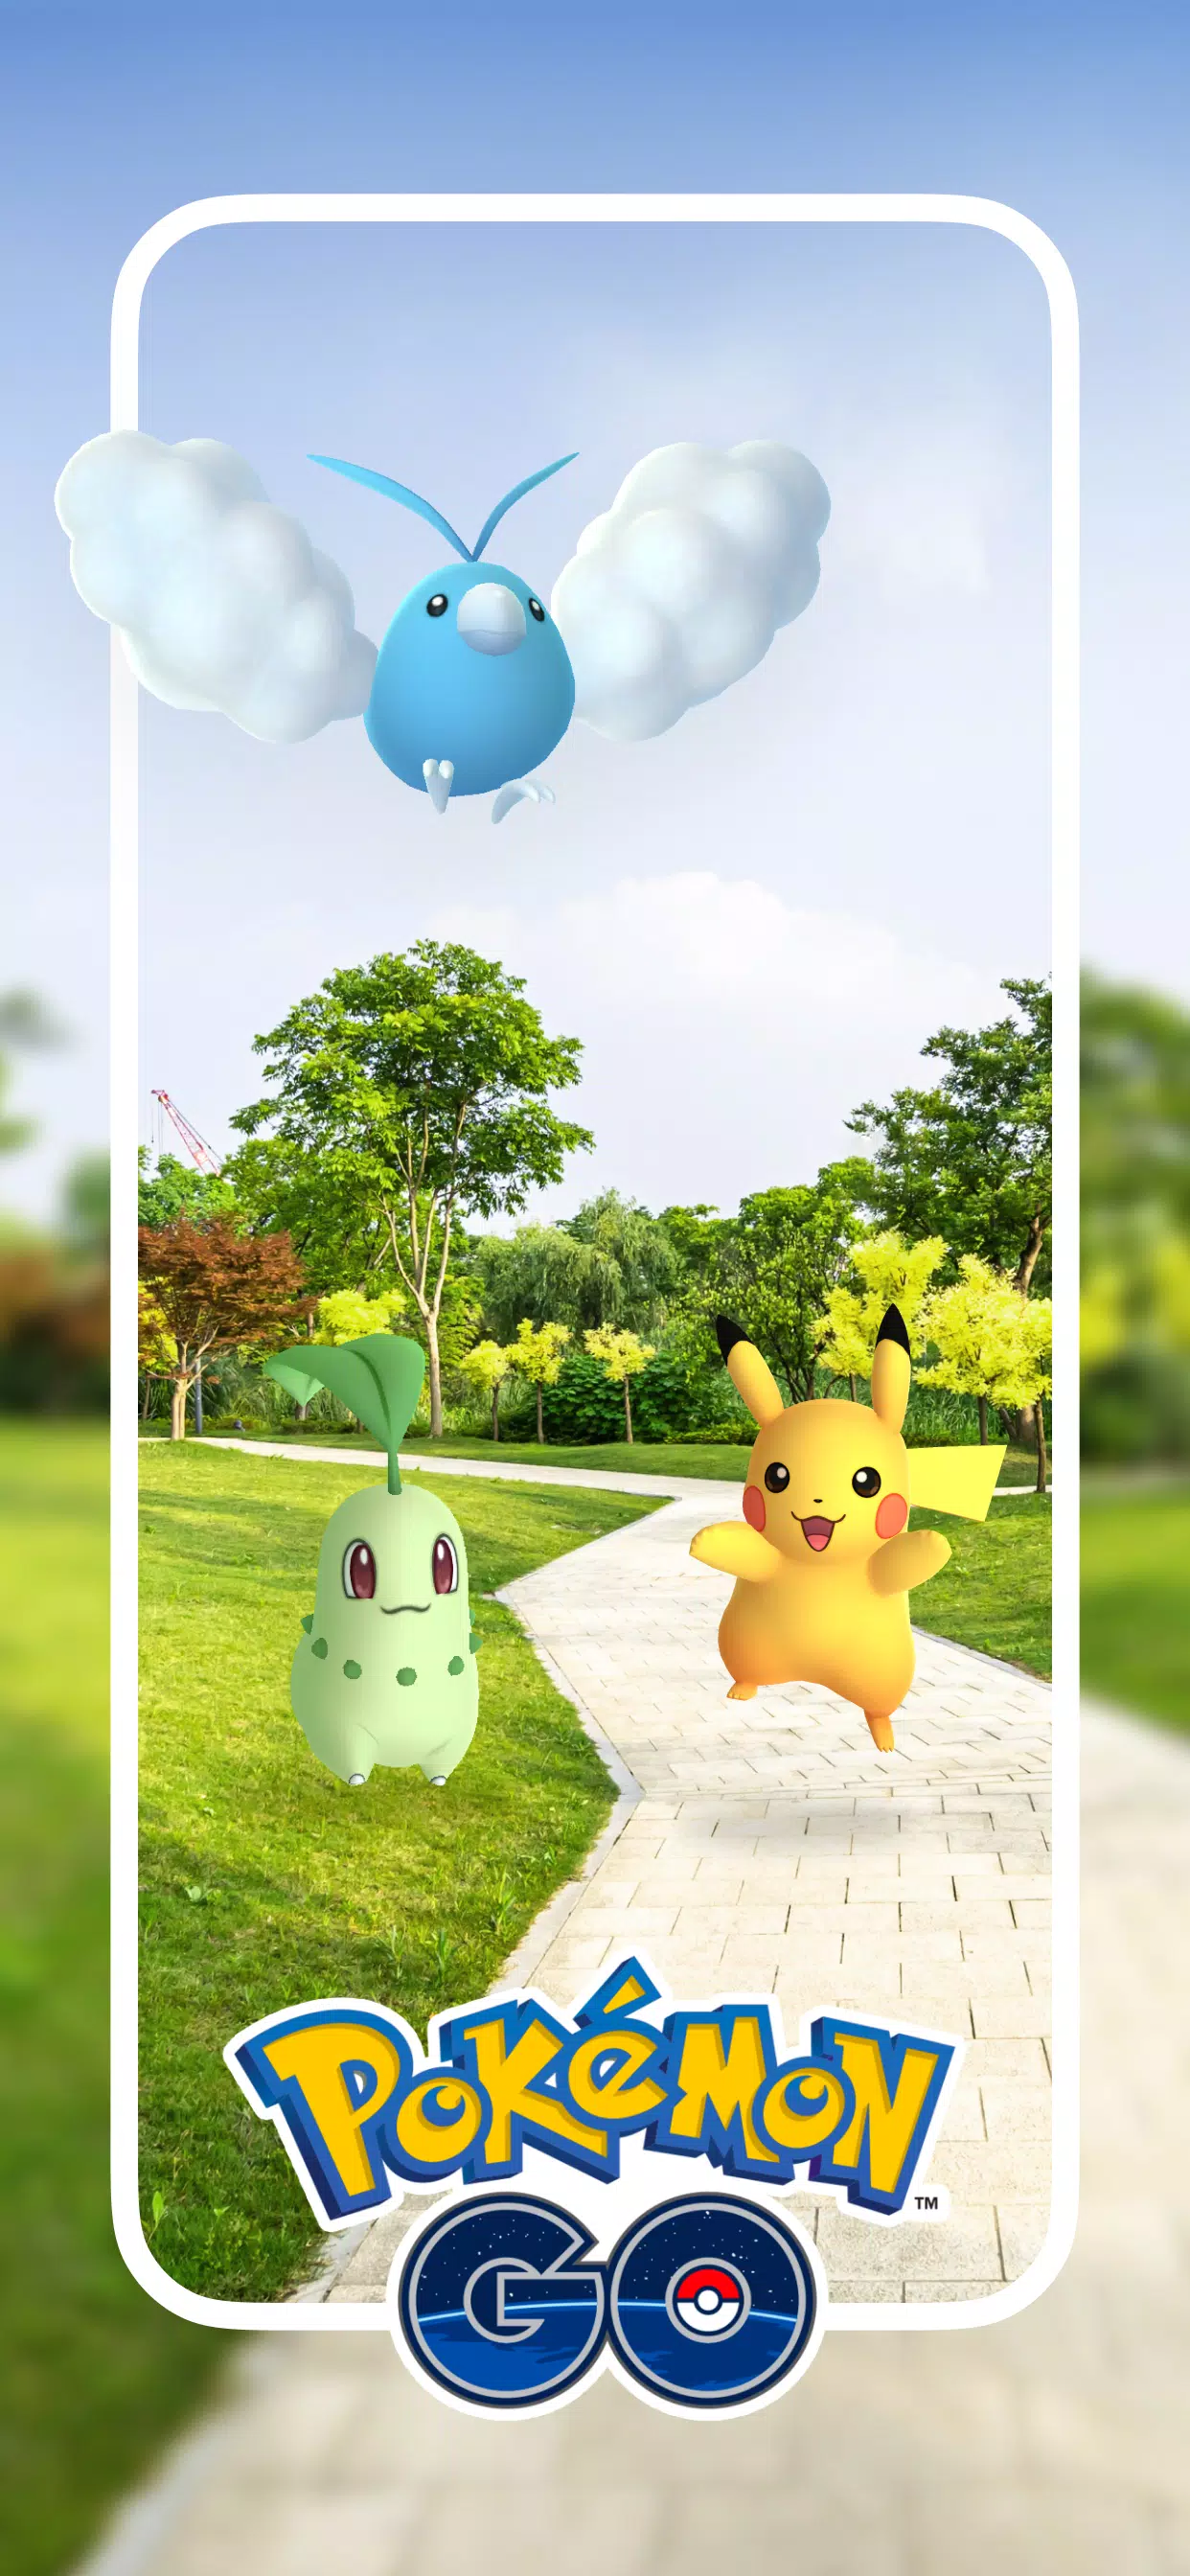 Easily Get Pokémon Go APK Download and Install on Android Phone